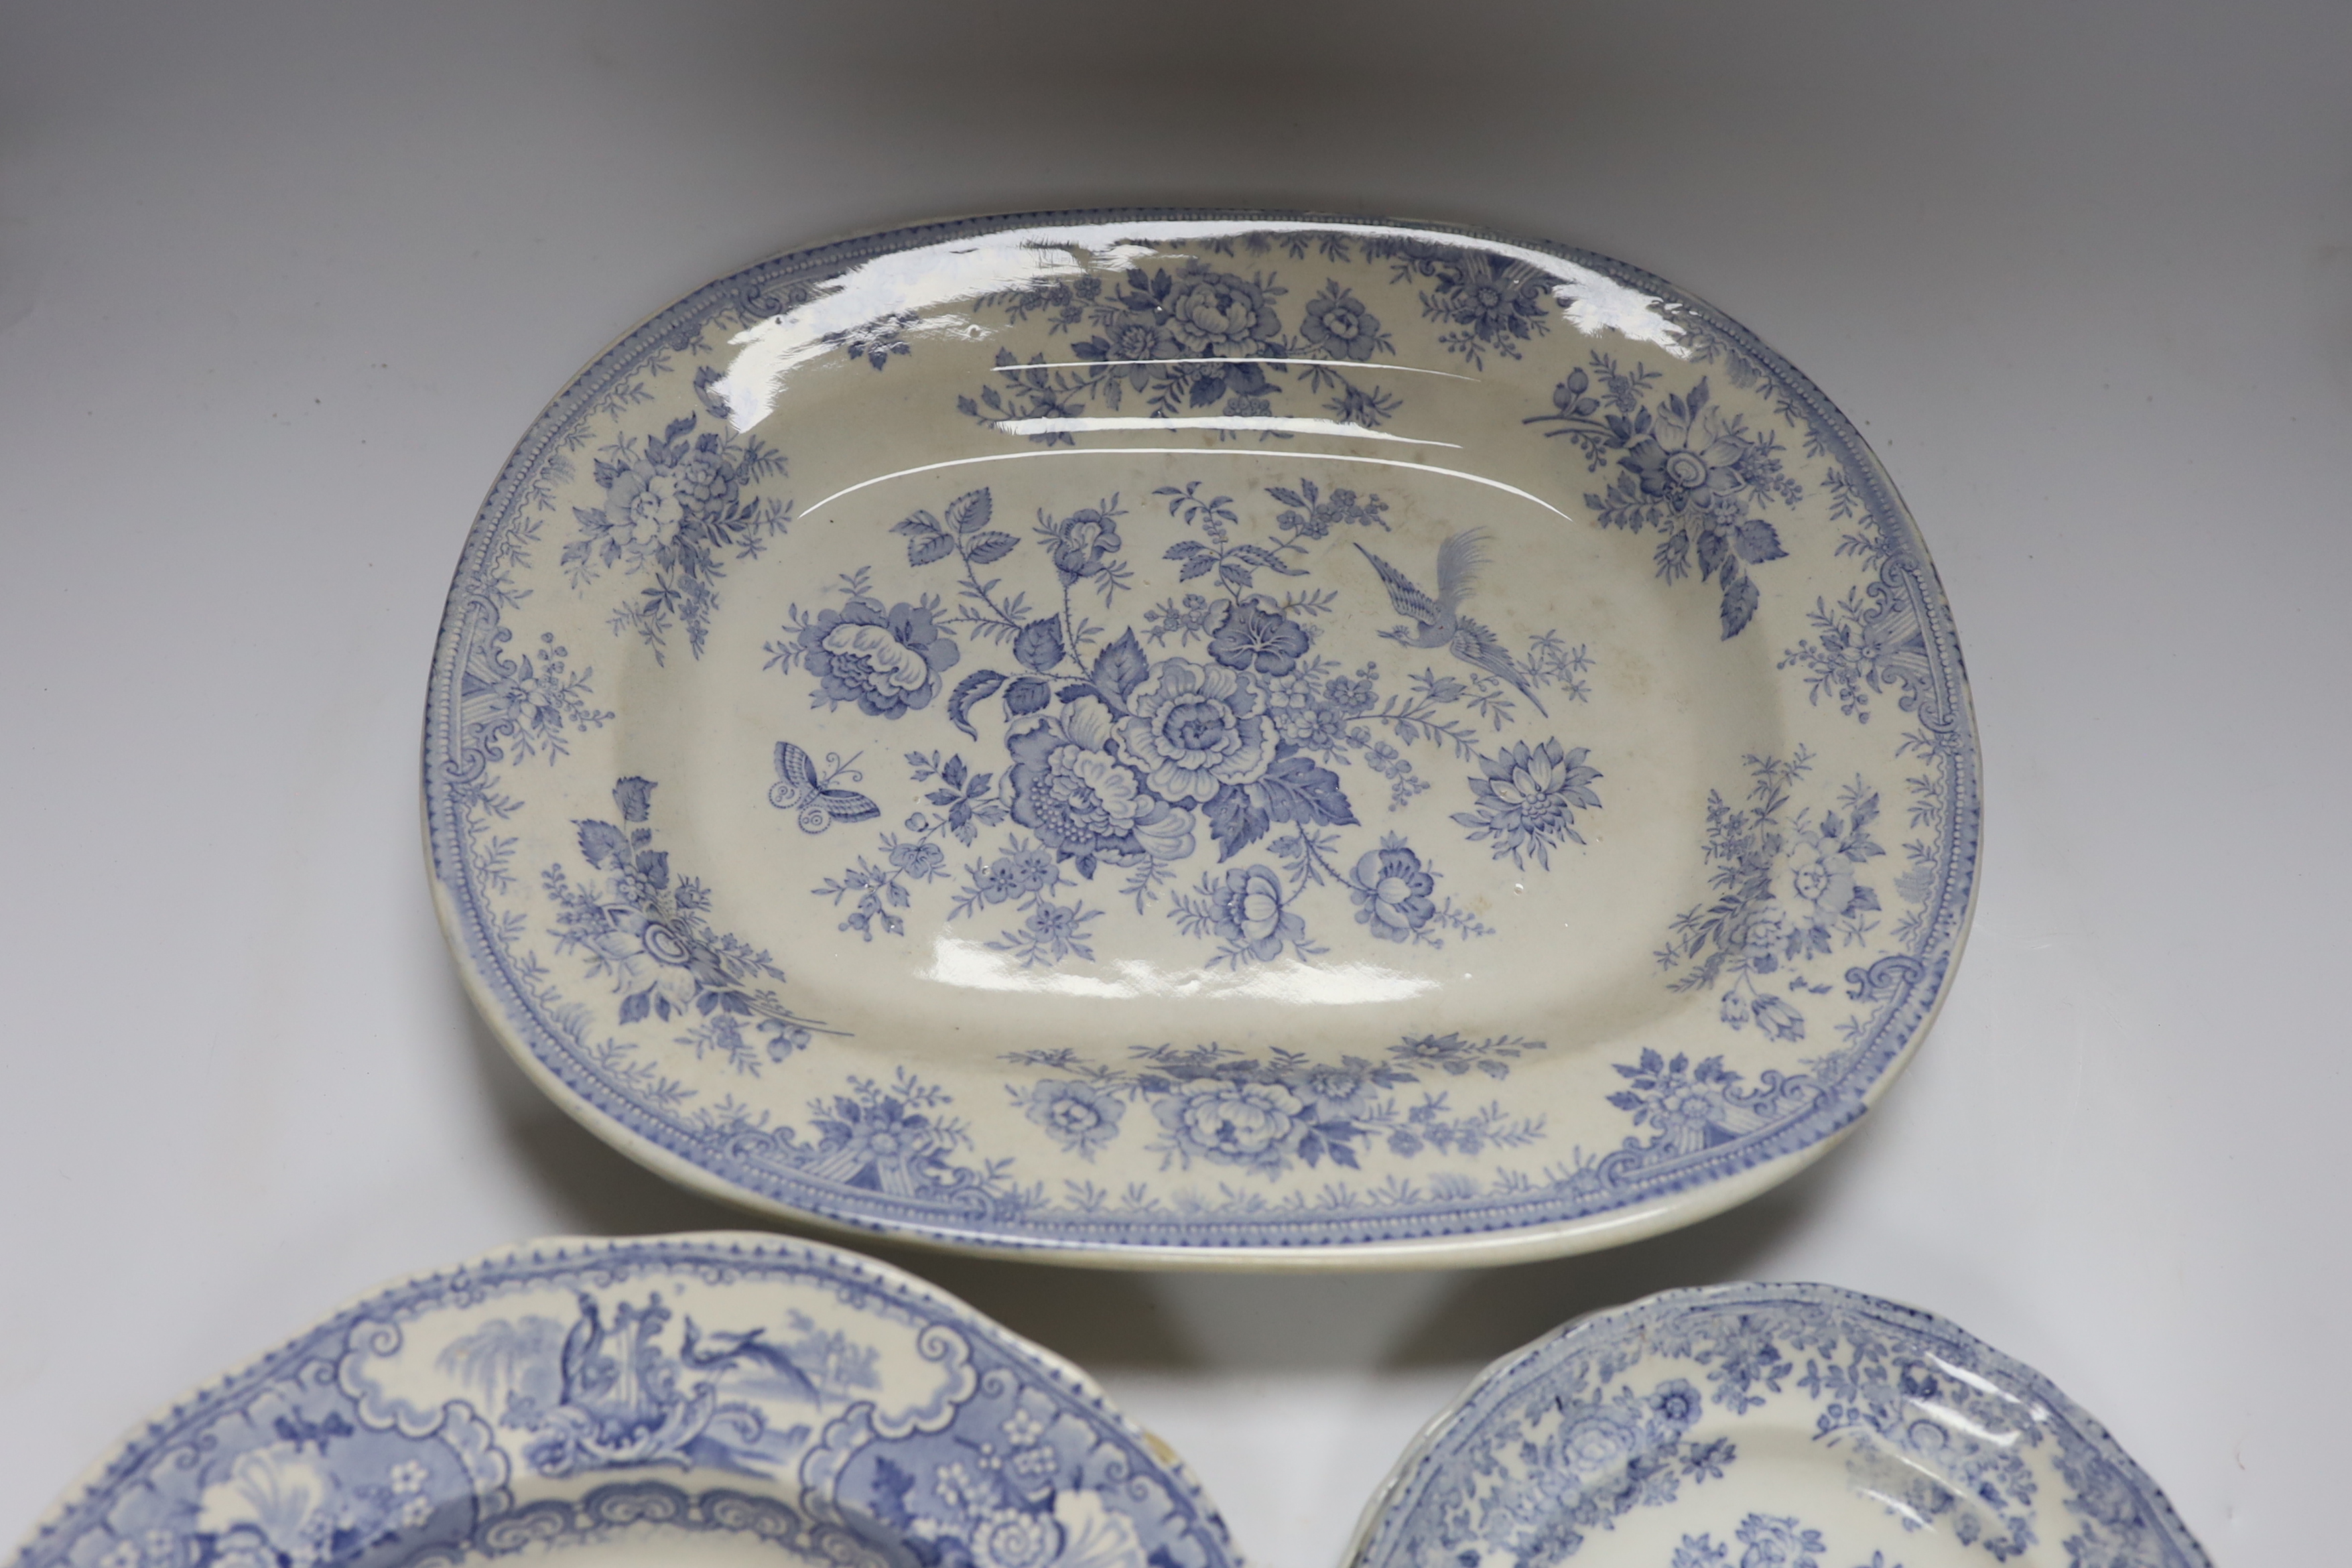 A collection of 19th century Staffordshire pottery blue and white dinner wares, (10 dishes in various sizes).